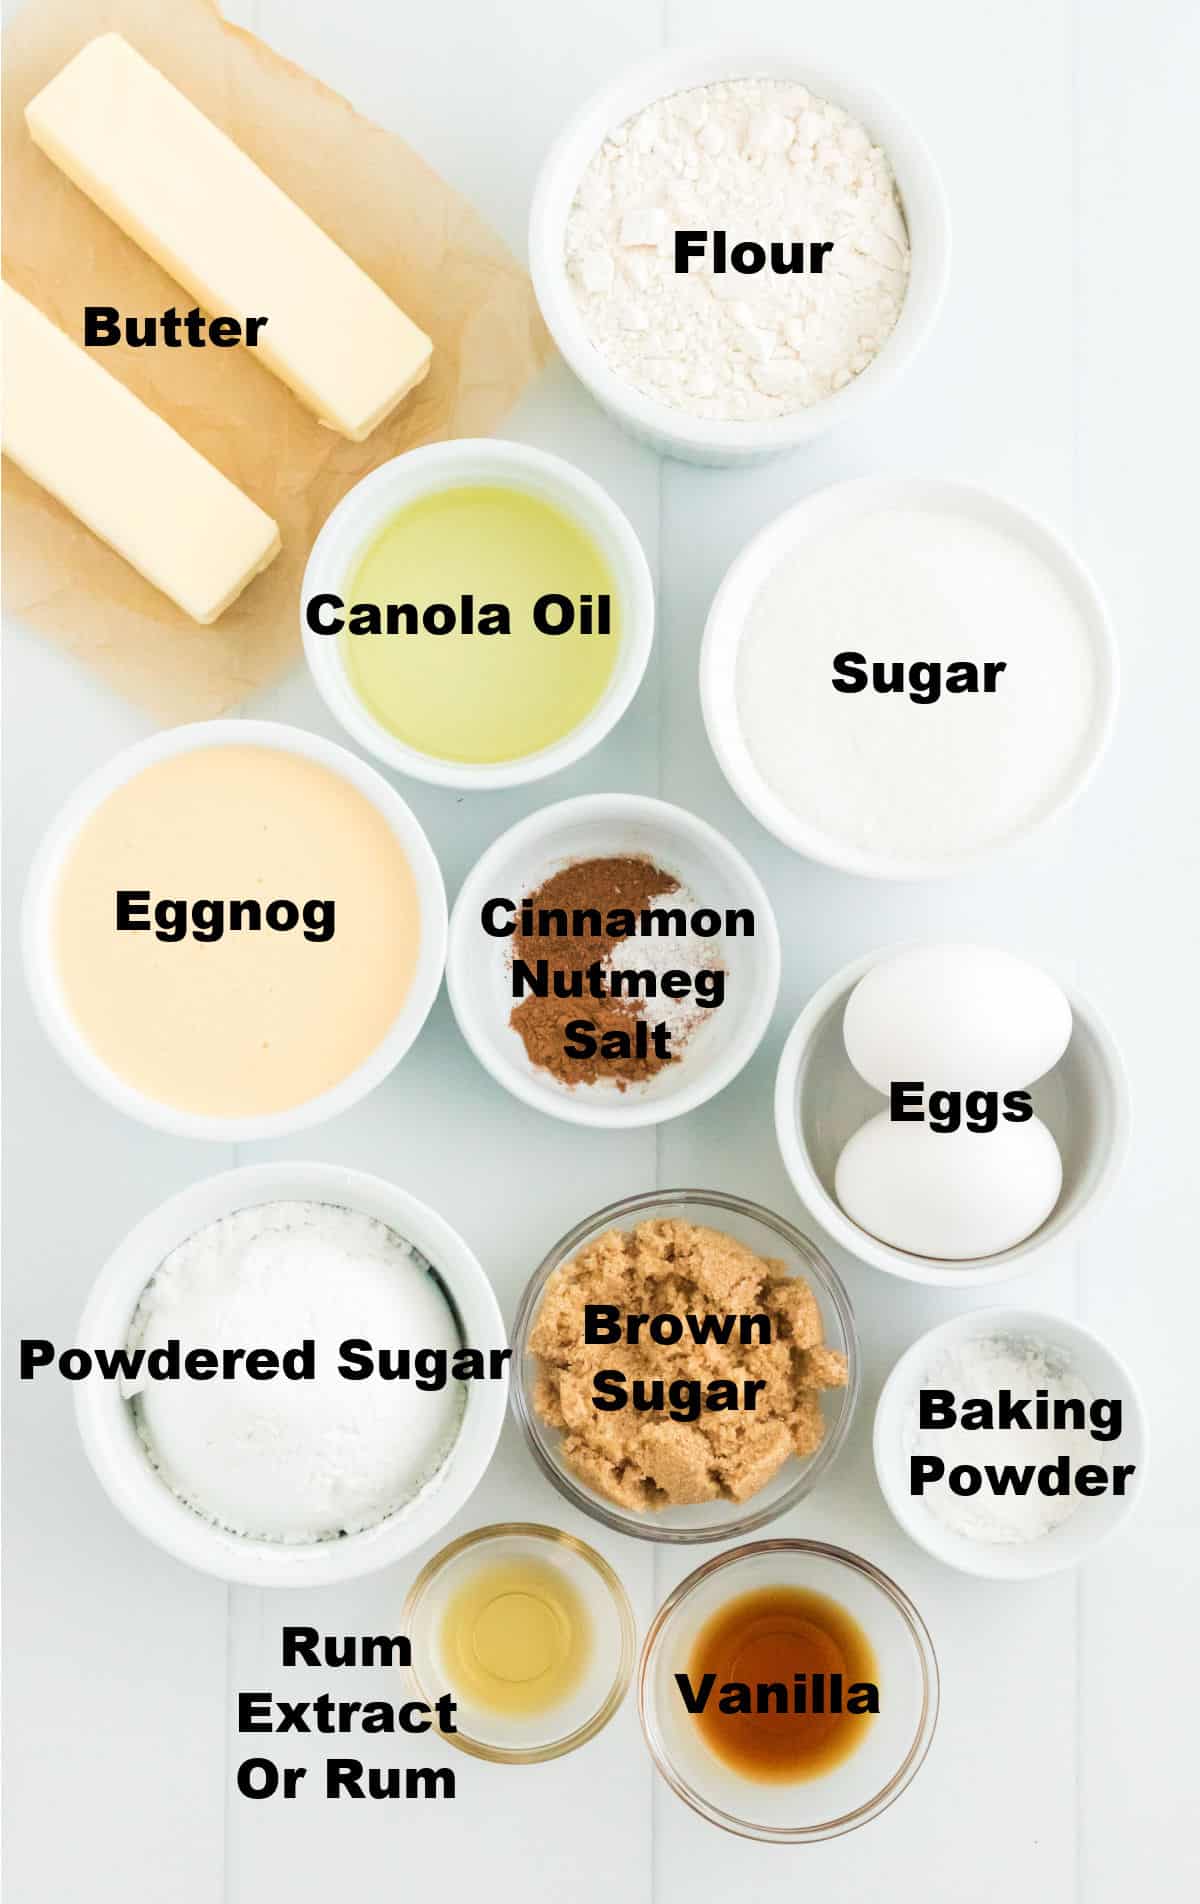 A photo of all the ingredients needed for this recipe.